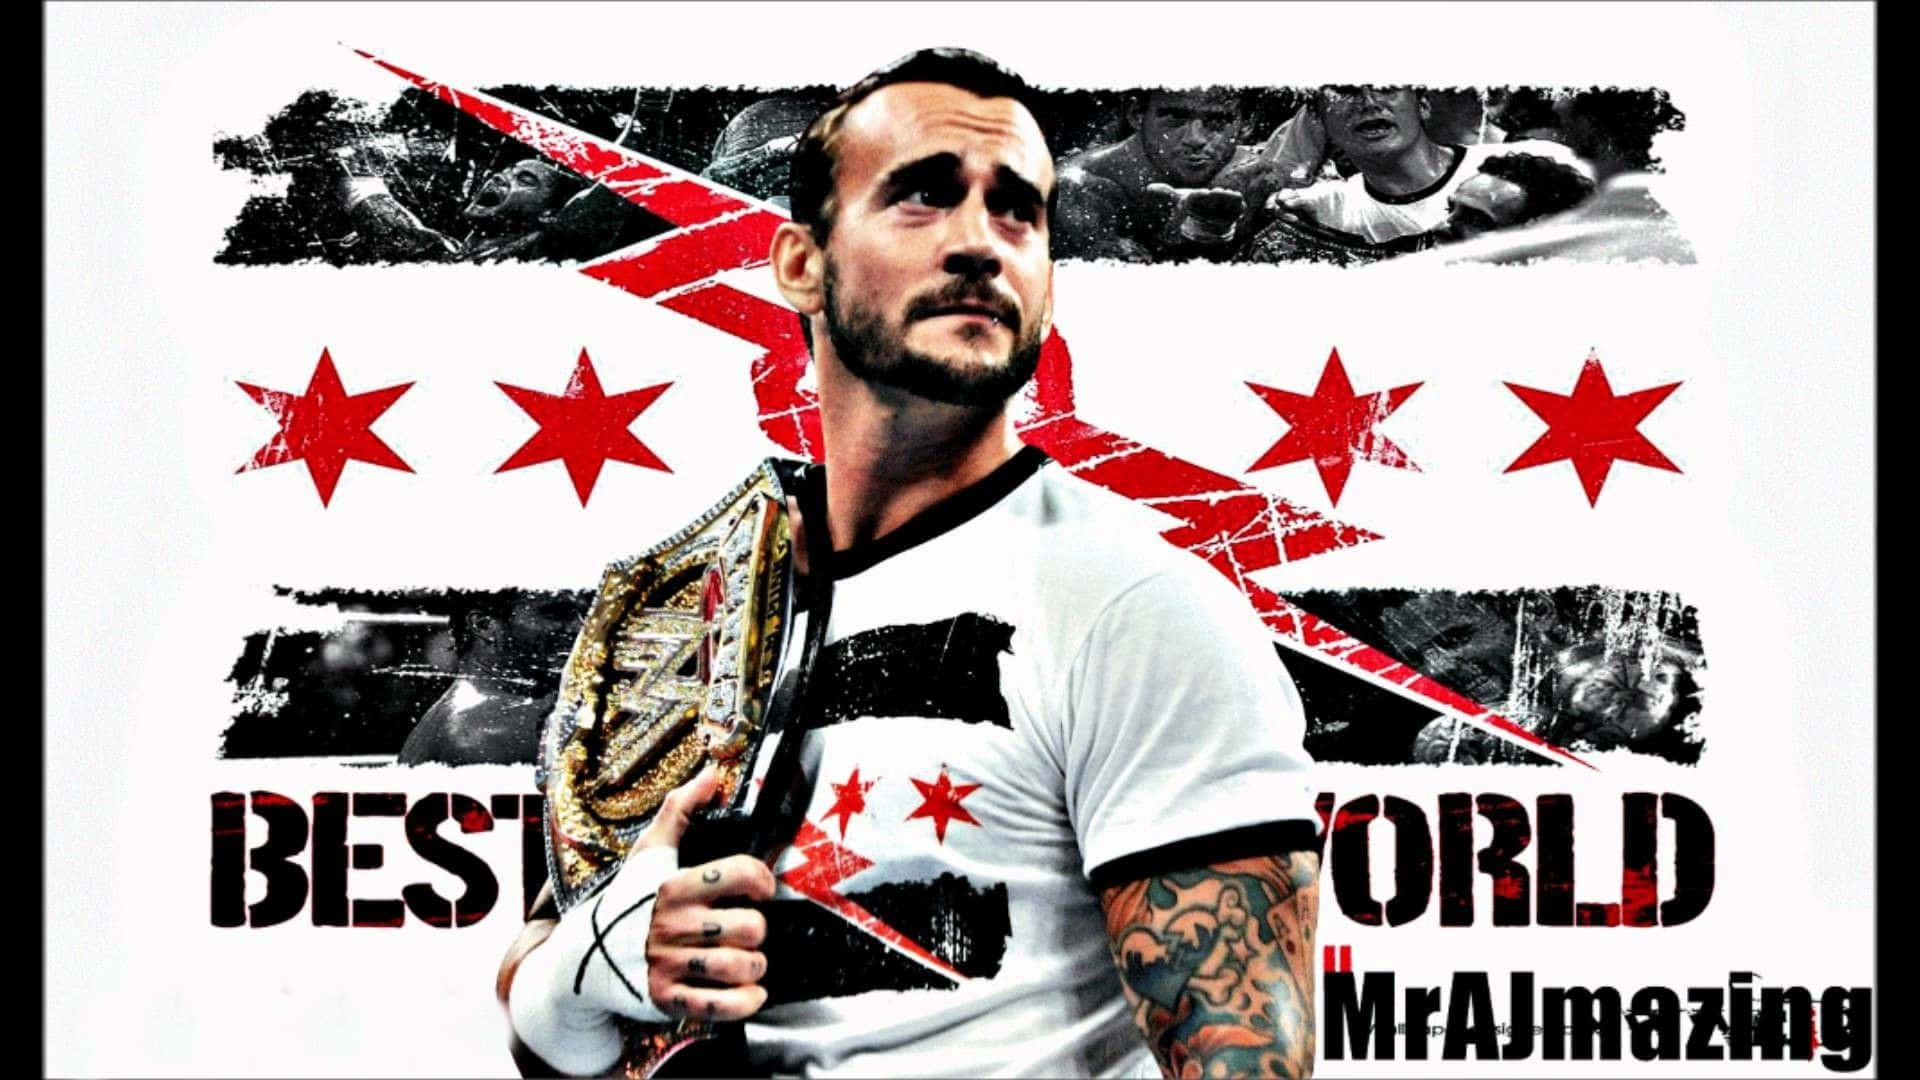 A Man With Tattoos Holding A Wrestling Belt Wallpaper